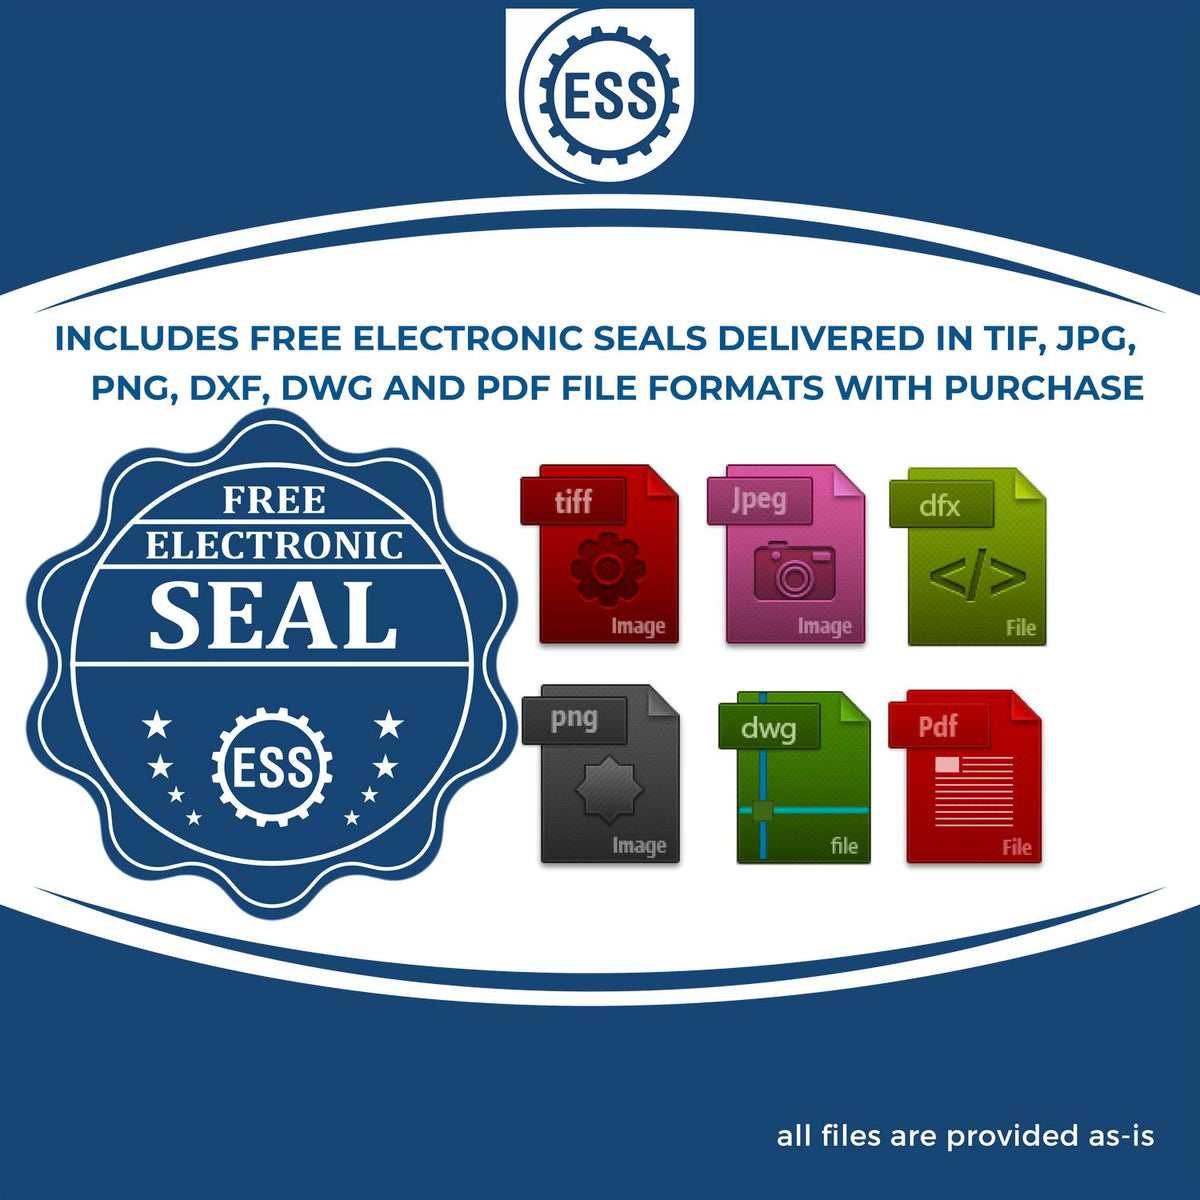 An infographic for the free electronic seal for the Heavy Duty Cast Iron Michigan Geologist Seal Embosser illustrating the different file type icons such as DXF, DWG, TIF, JPG and PNG.